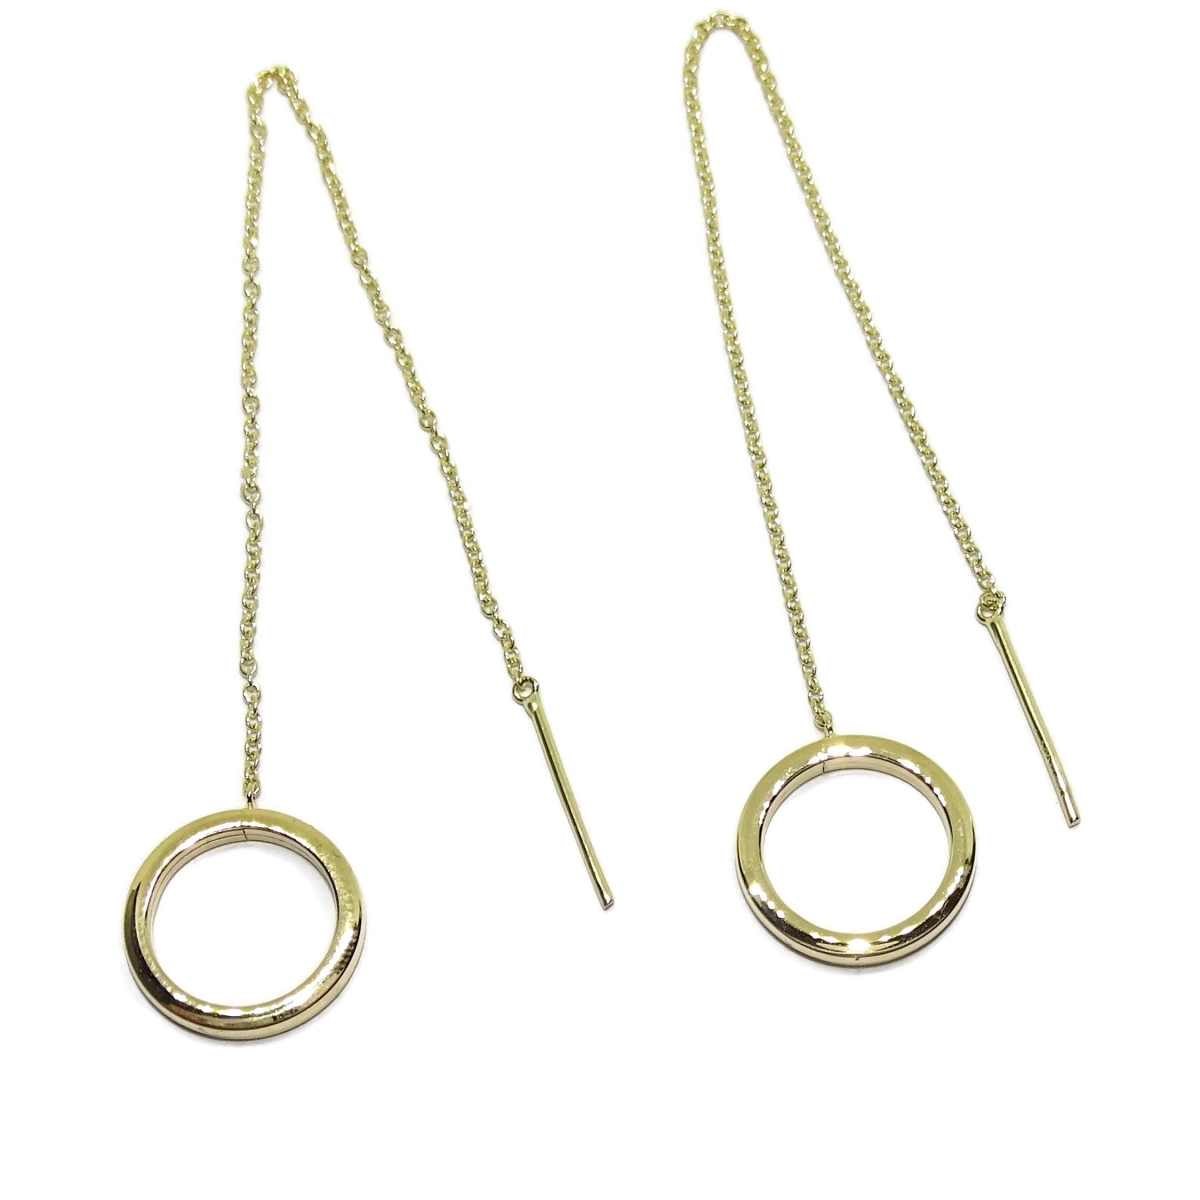 BEAUTIFUL EARRINGS OF 18K YELLOW GOLD WITH PIN AND CHAIN MINI FORCED. NEVER SAY NEVER